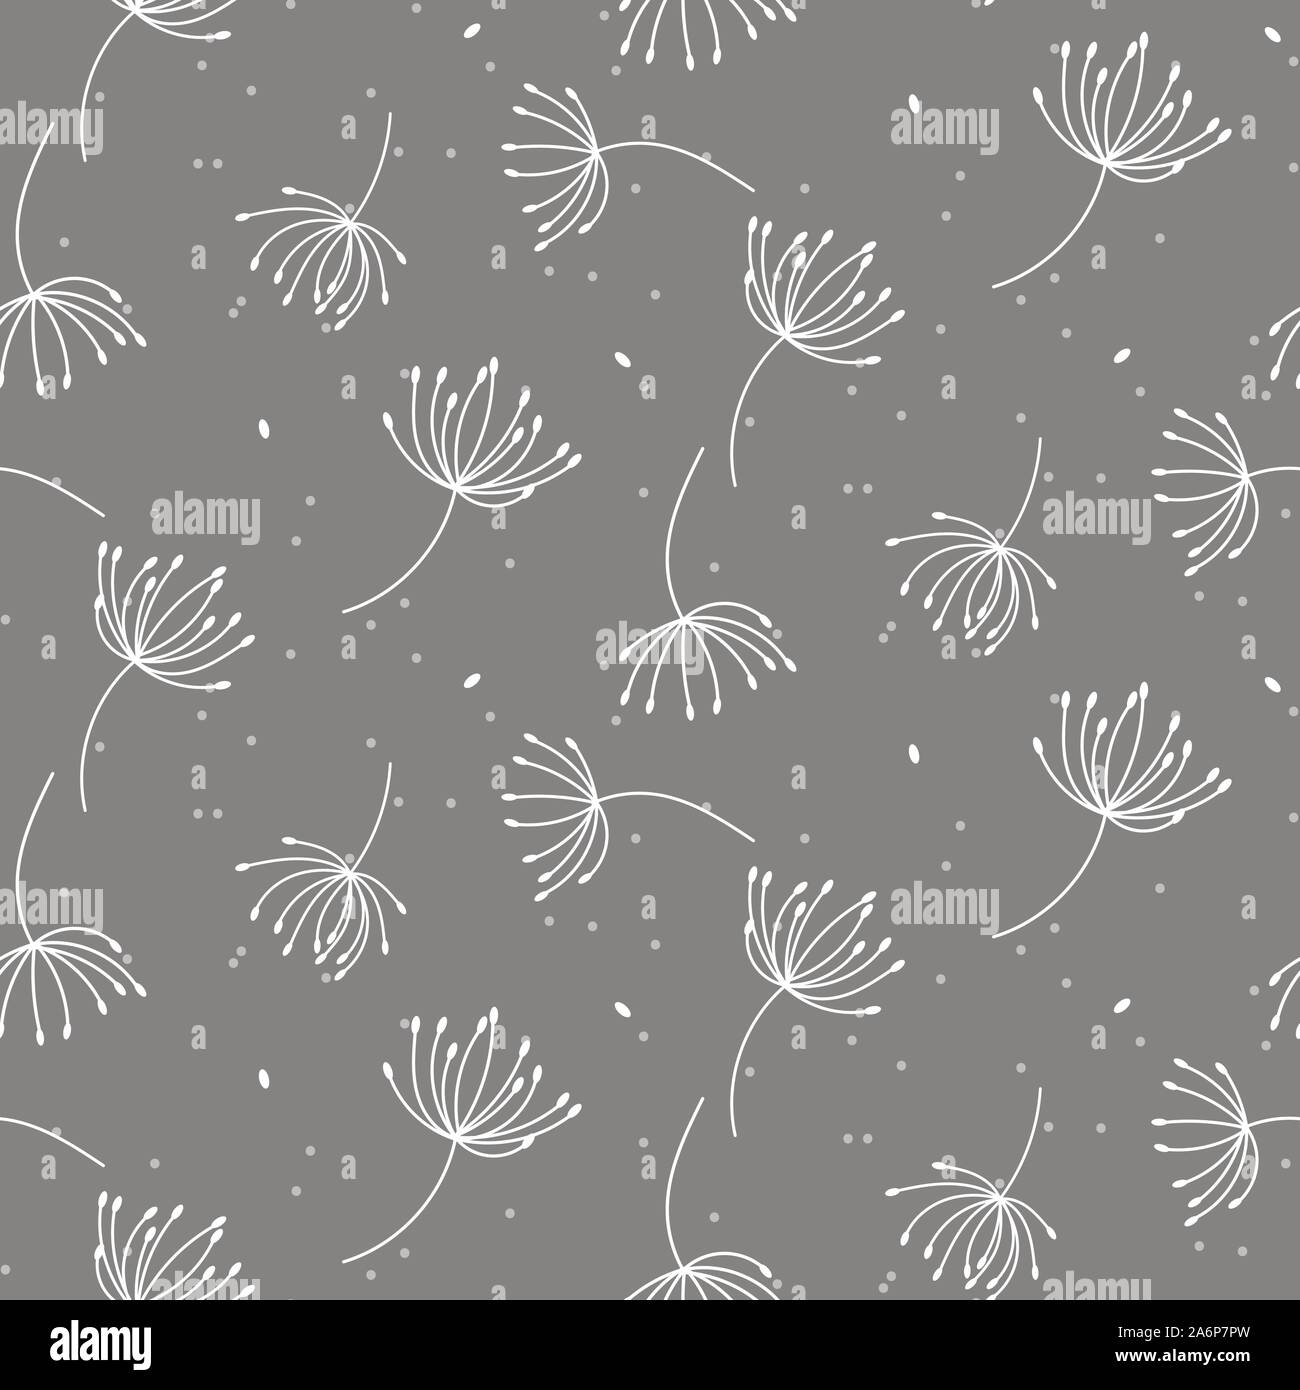 Seamless pattern texture with outline dandelions on gray background. Stock Vector